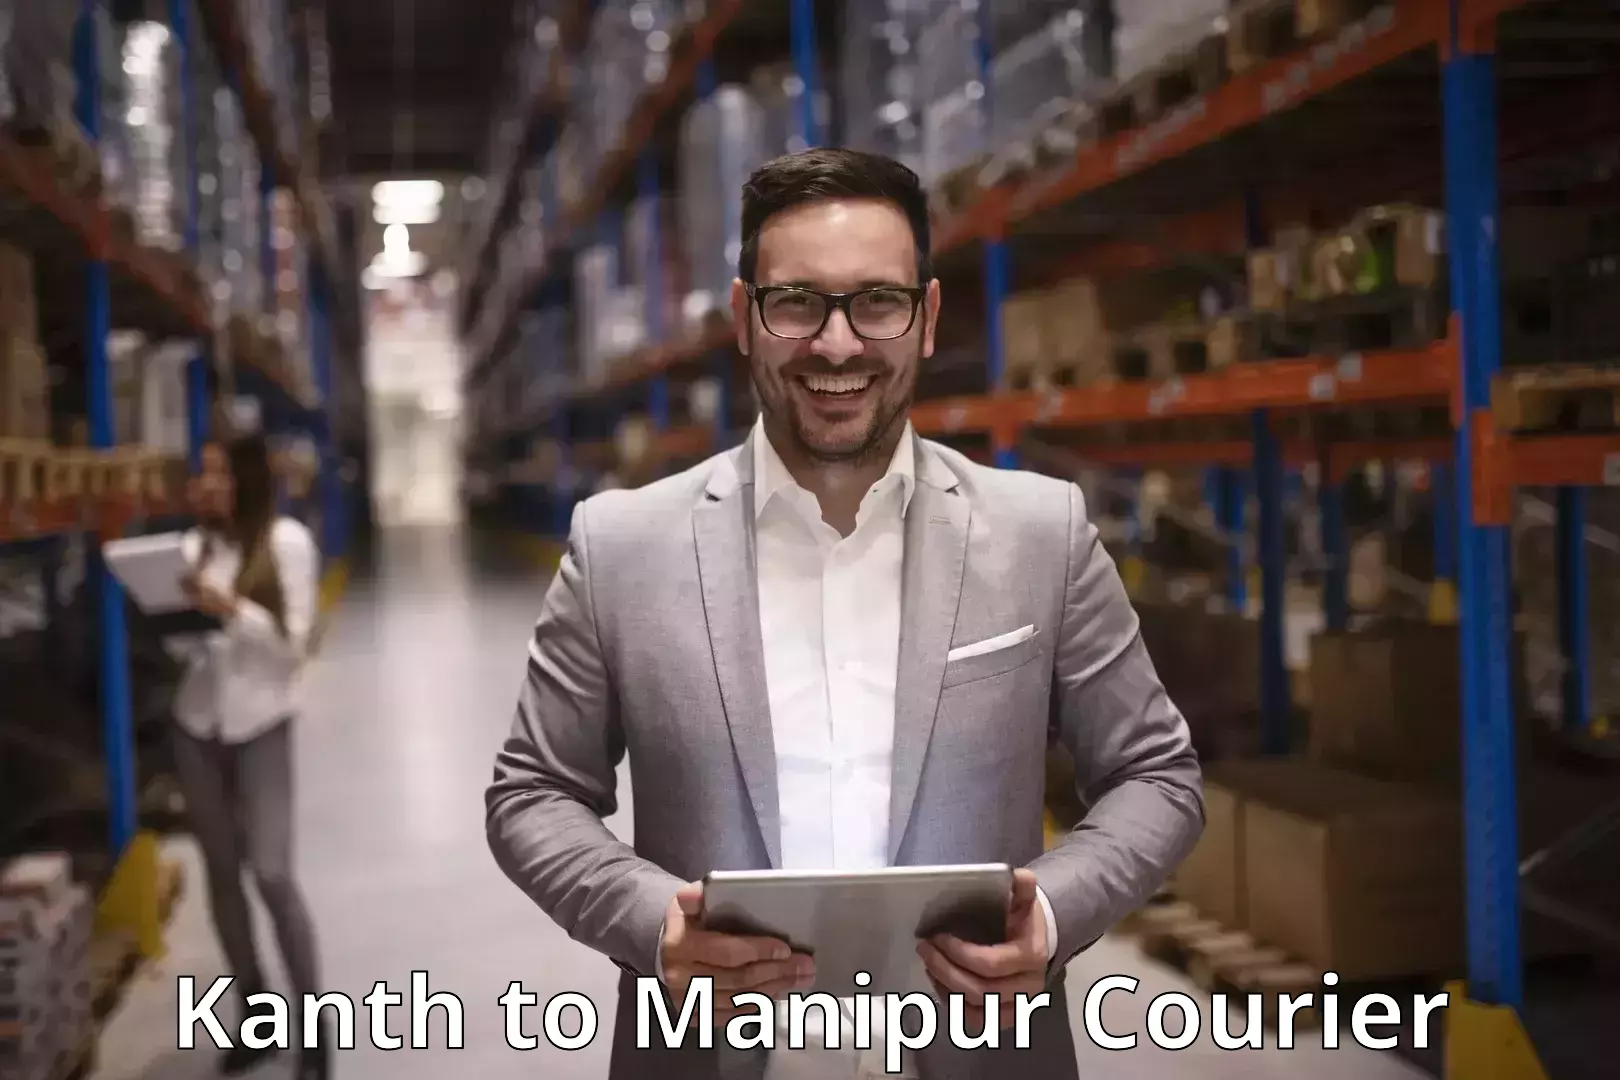 State-of-the-art courier technology Kanth to Manipur